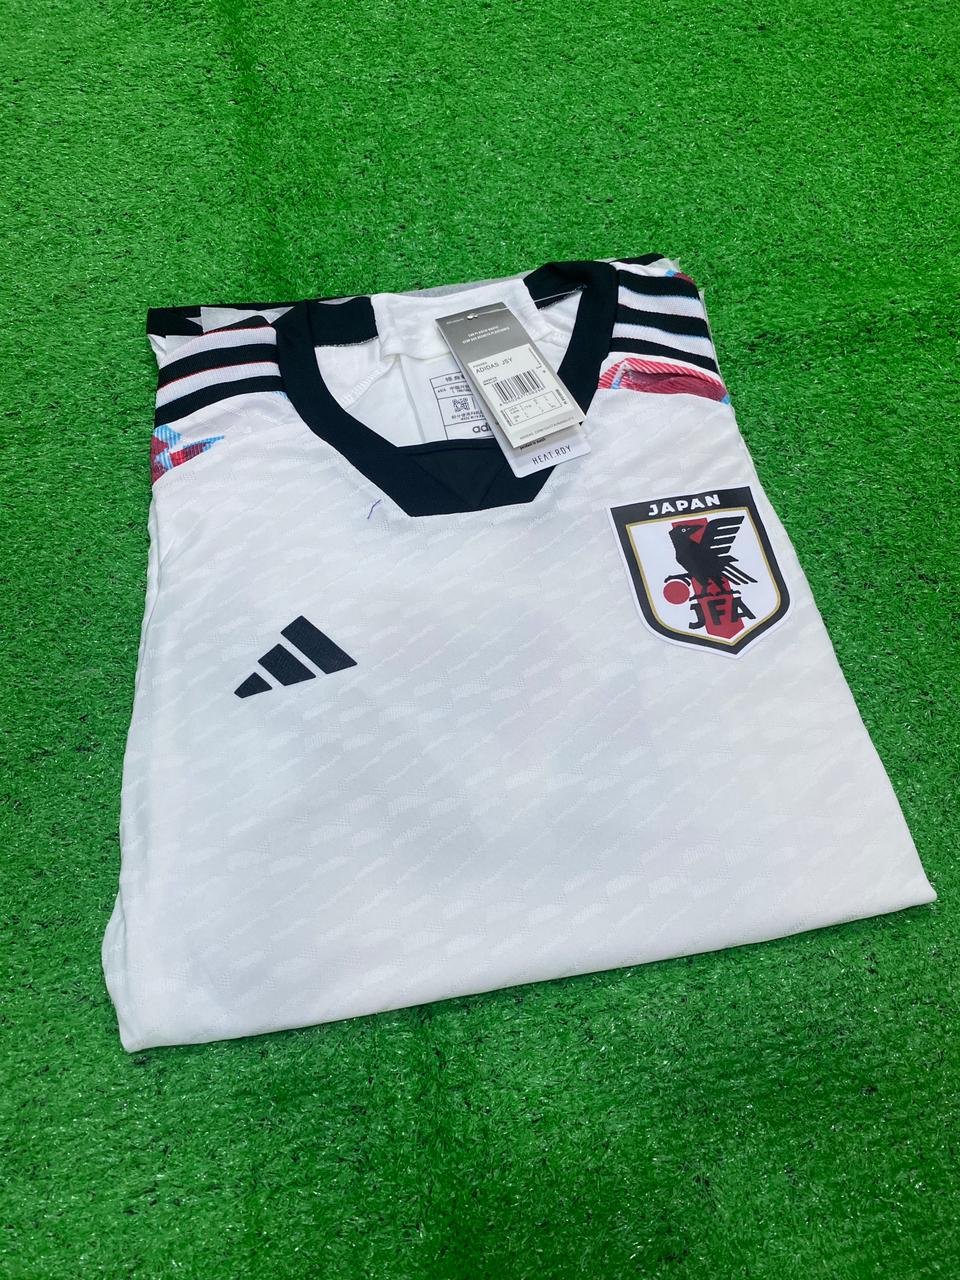 Japan PLAYER VERSION Away World Cup 2022 Jersey